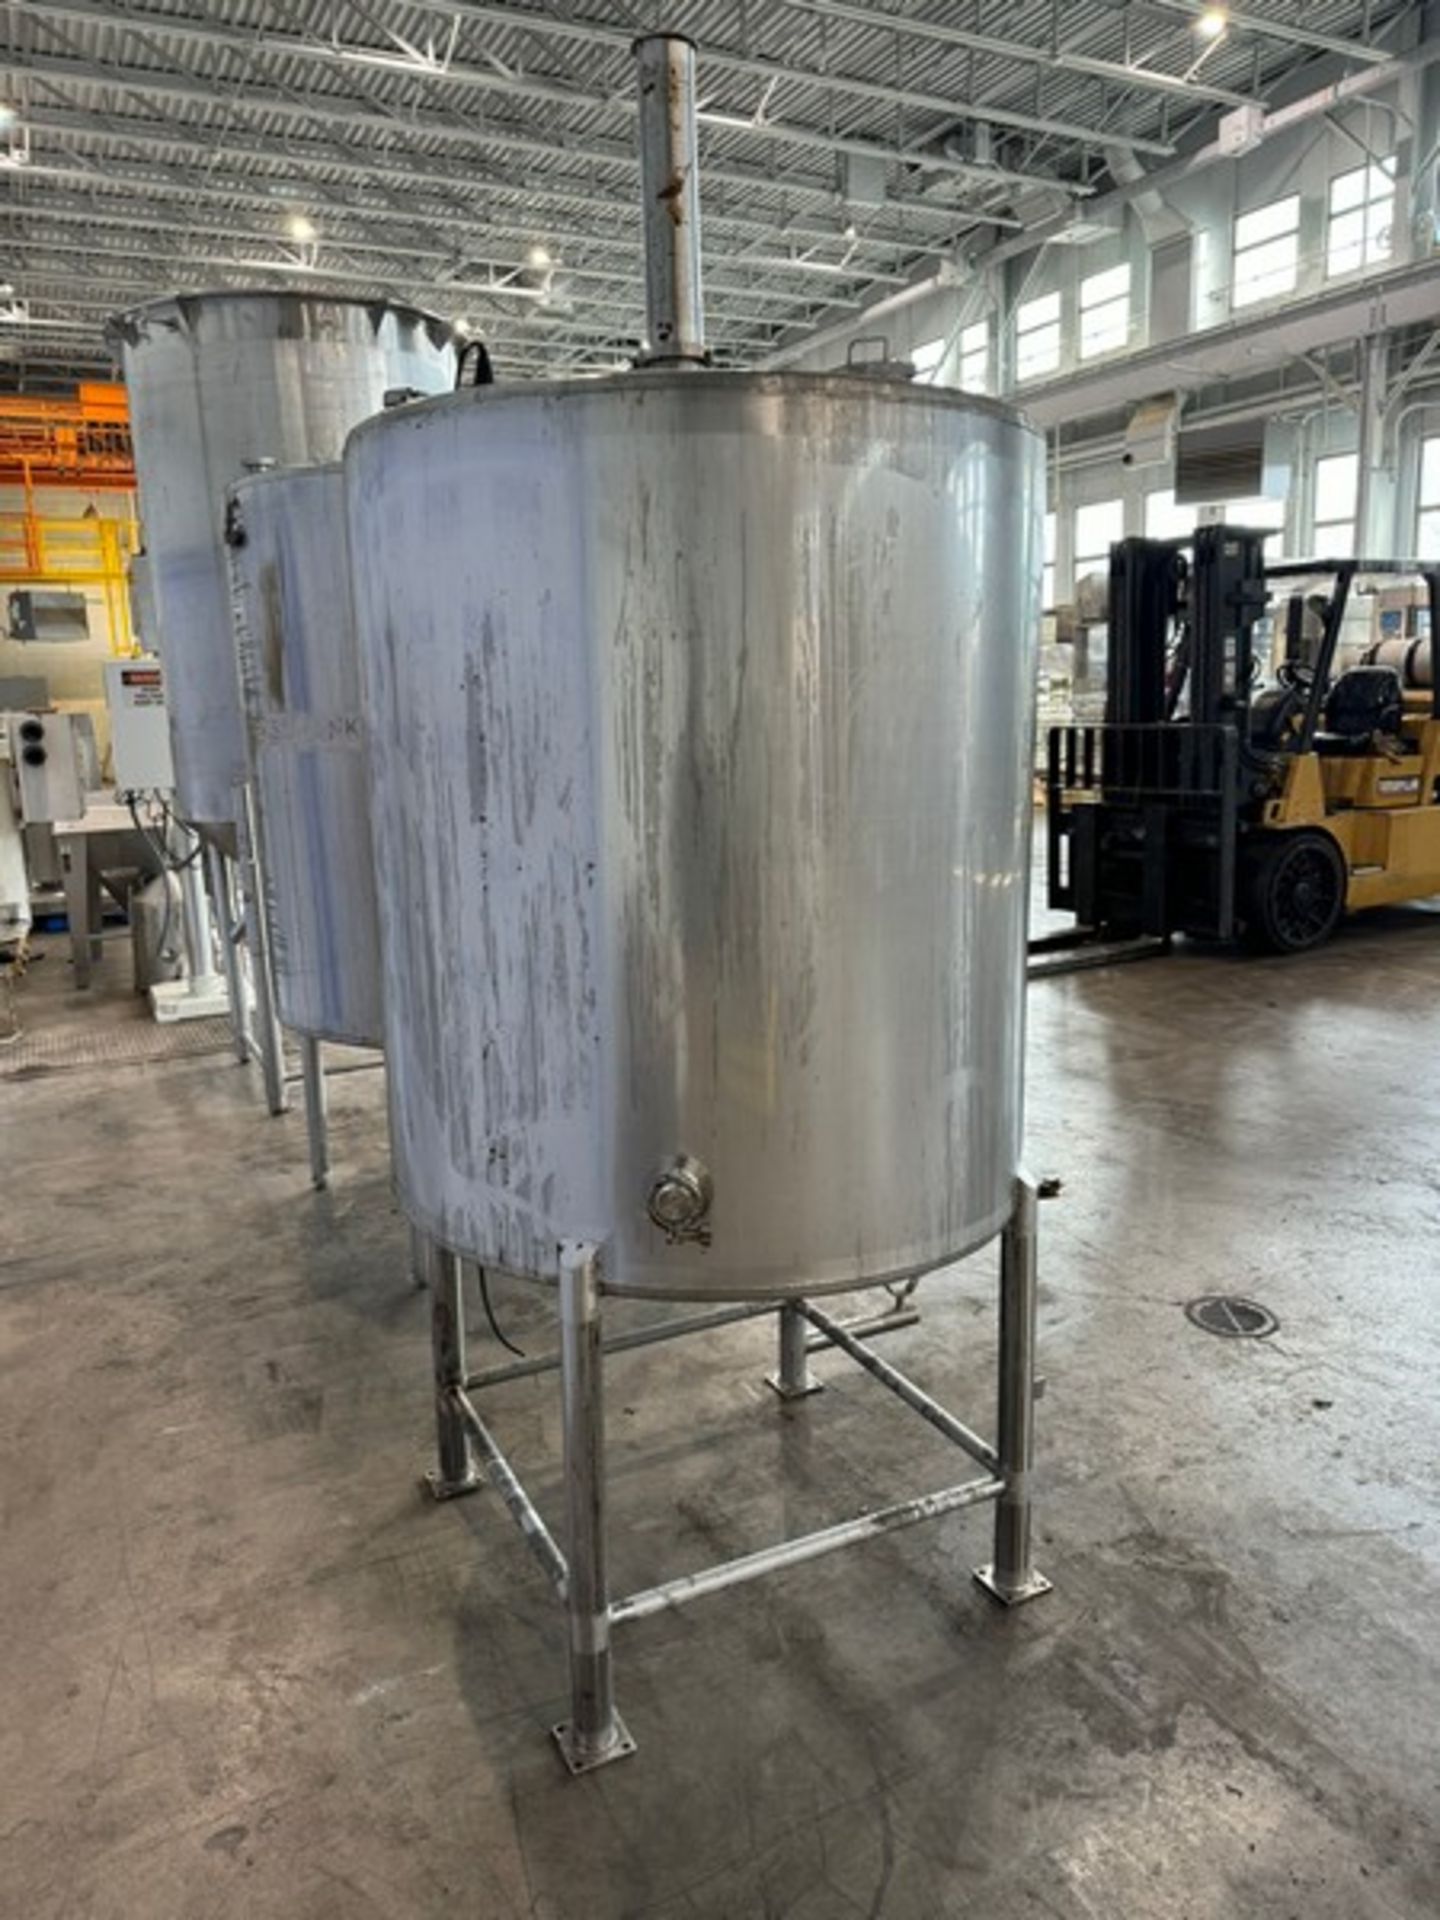 Viatec Aprox. 300 Gal. S/S Single Wall Tank, Vessel Dims.: Aprox. 47" H x 46" Dia. Mounted on S/S - Image 4 of 8